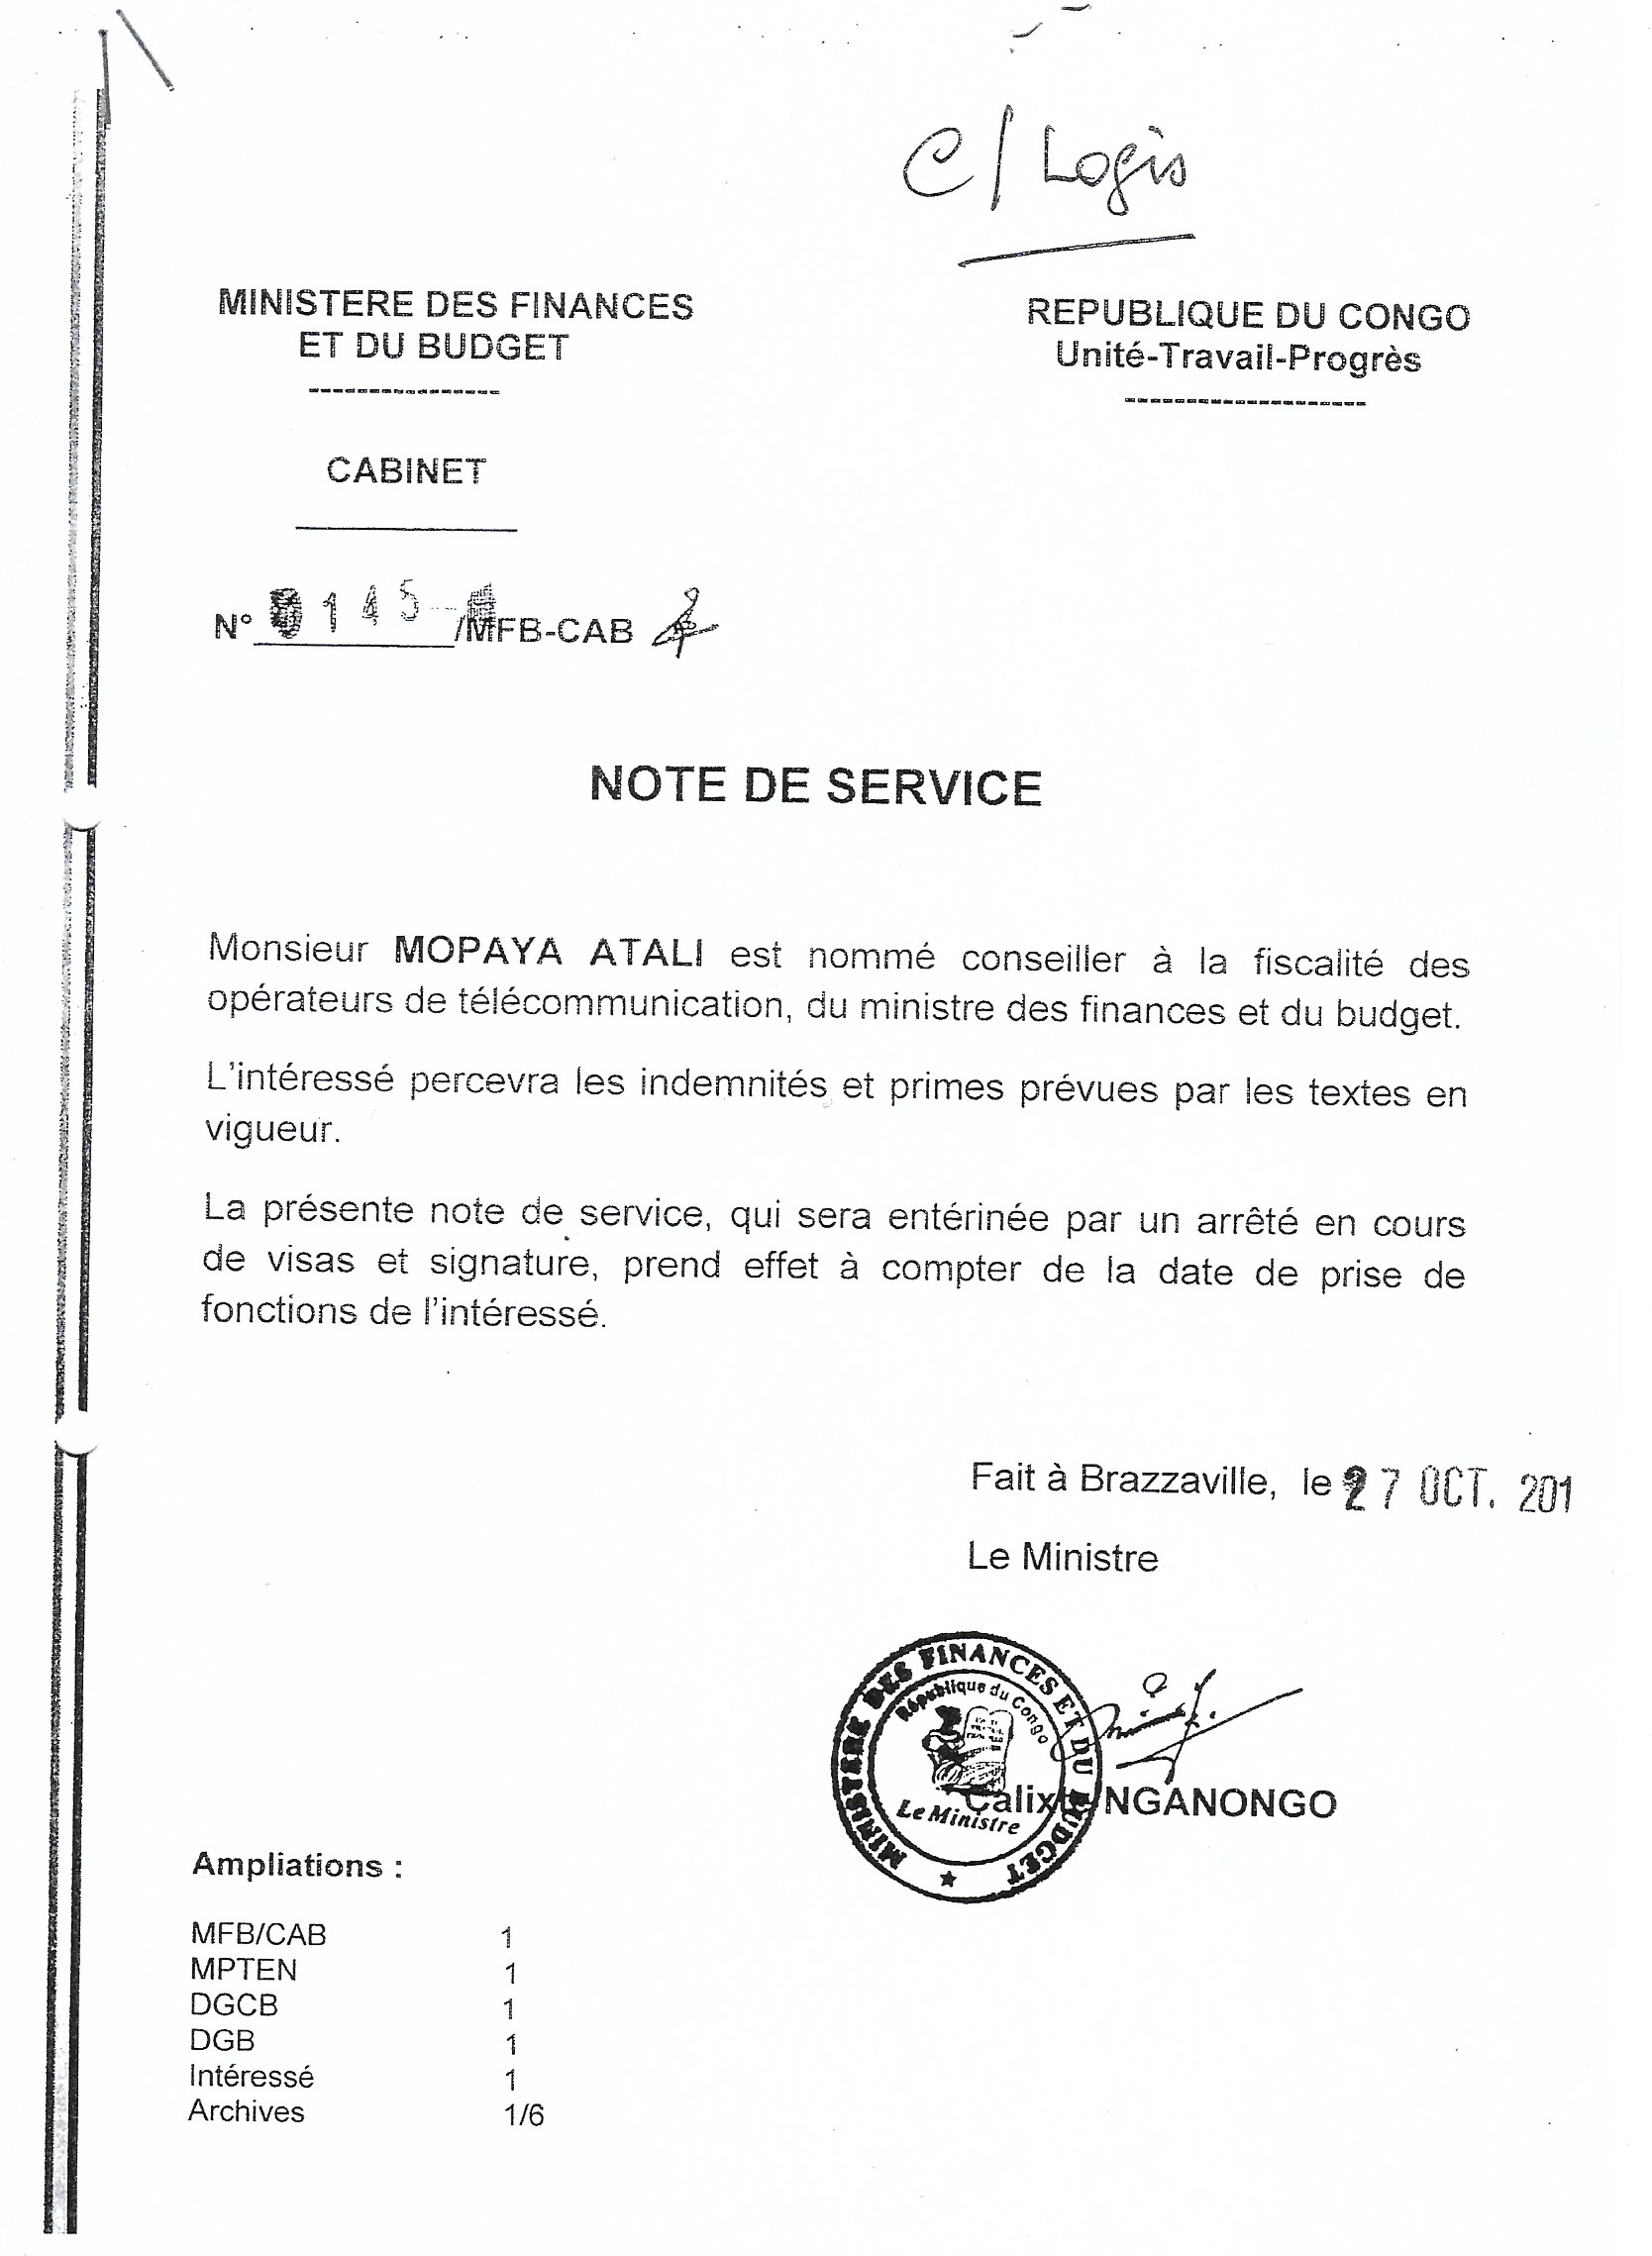 Note de Service N°0145/MFB/CAB | Ministry of Finance and Budget